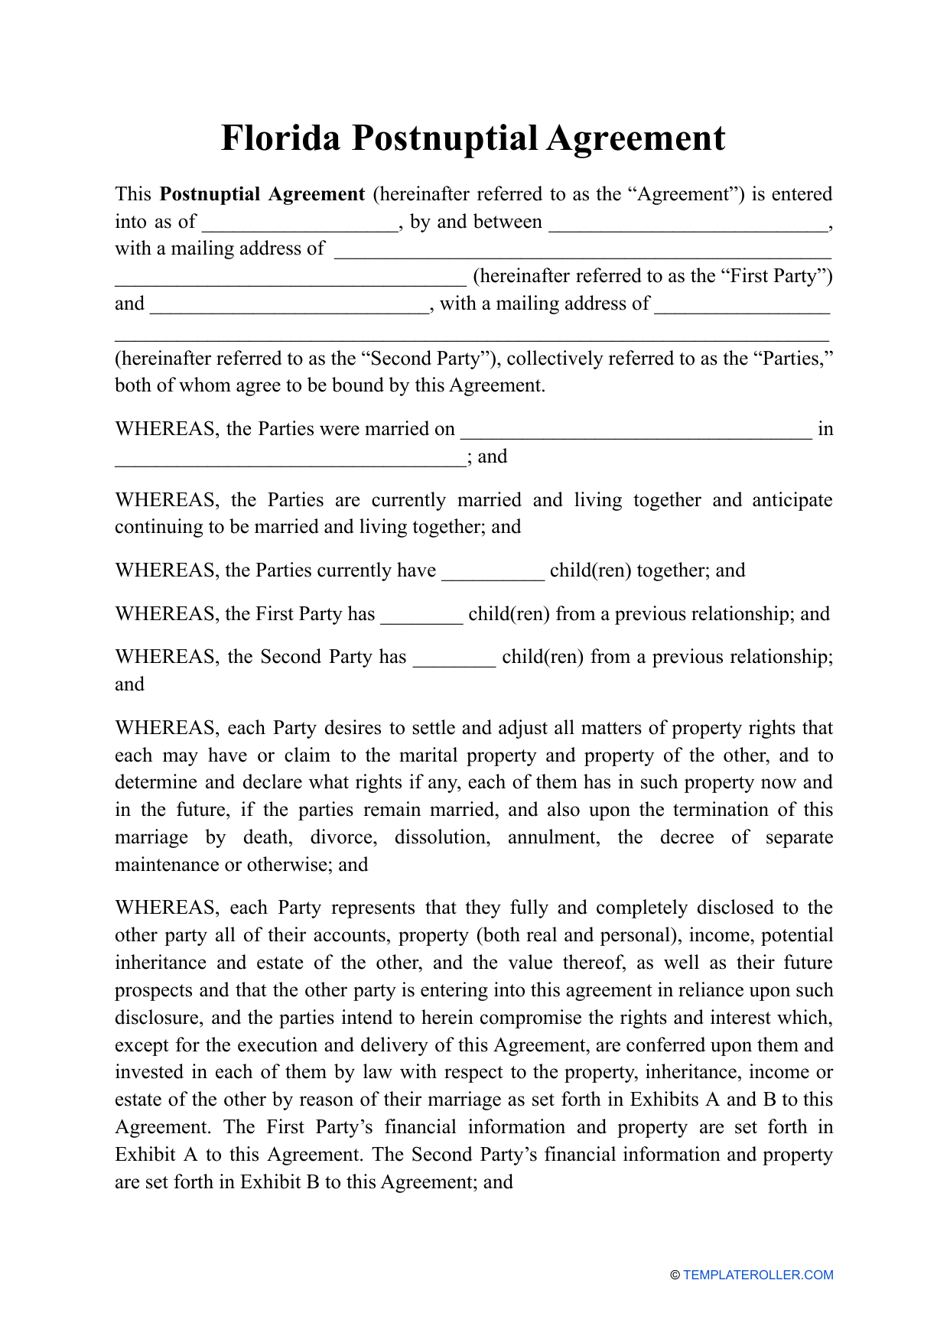 Postnuptial Agreement Template - Florida, Page 1